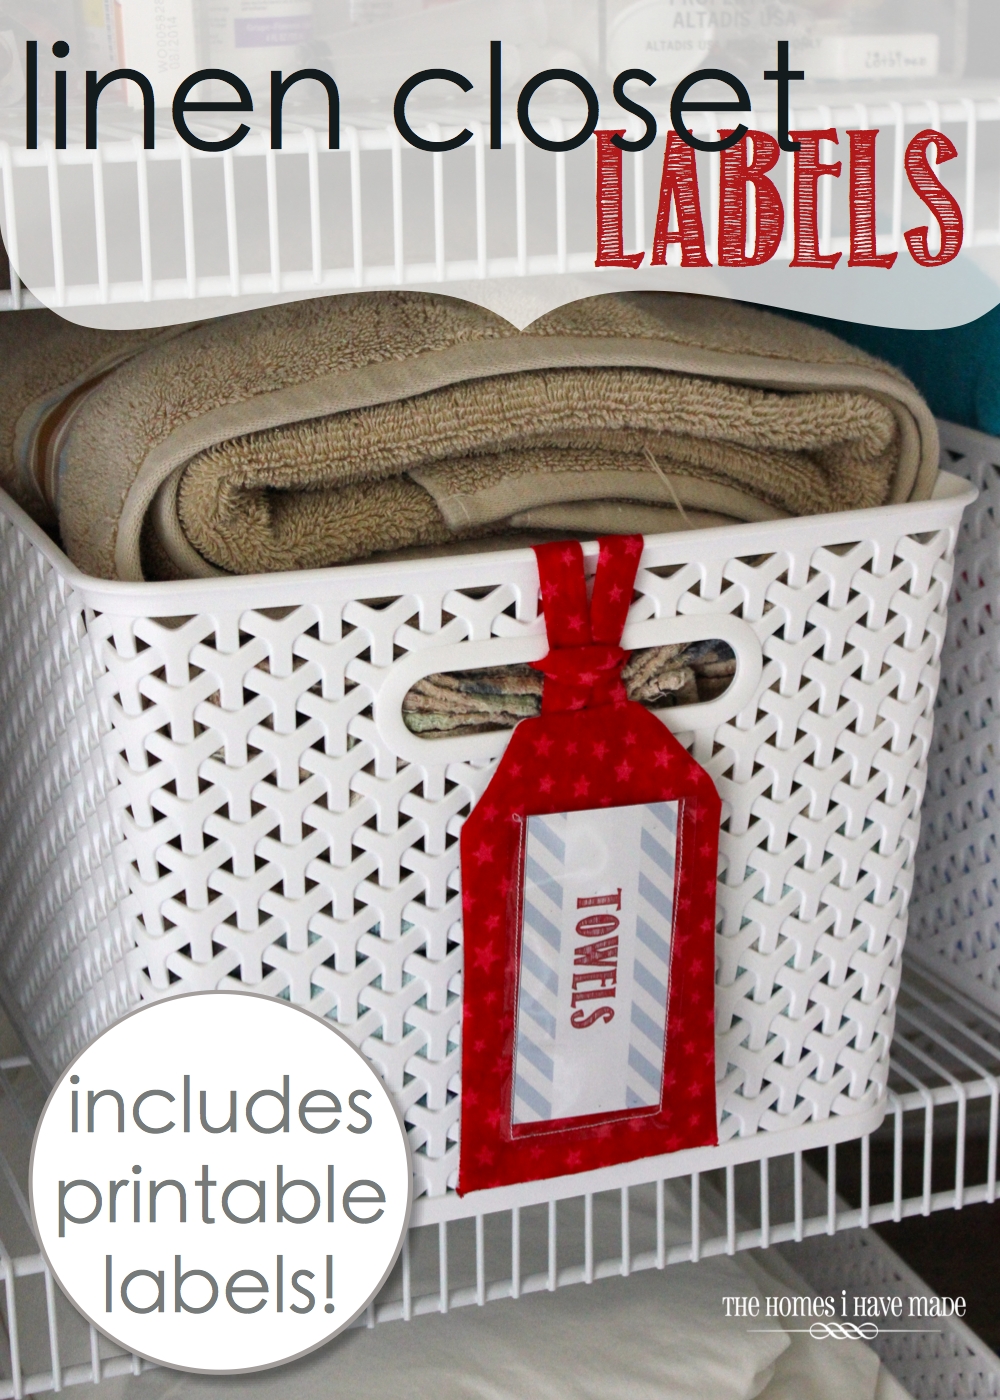 linen-closet-labels-with-free-printable-labels-the-homes-i-have-made